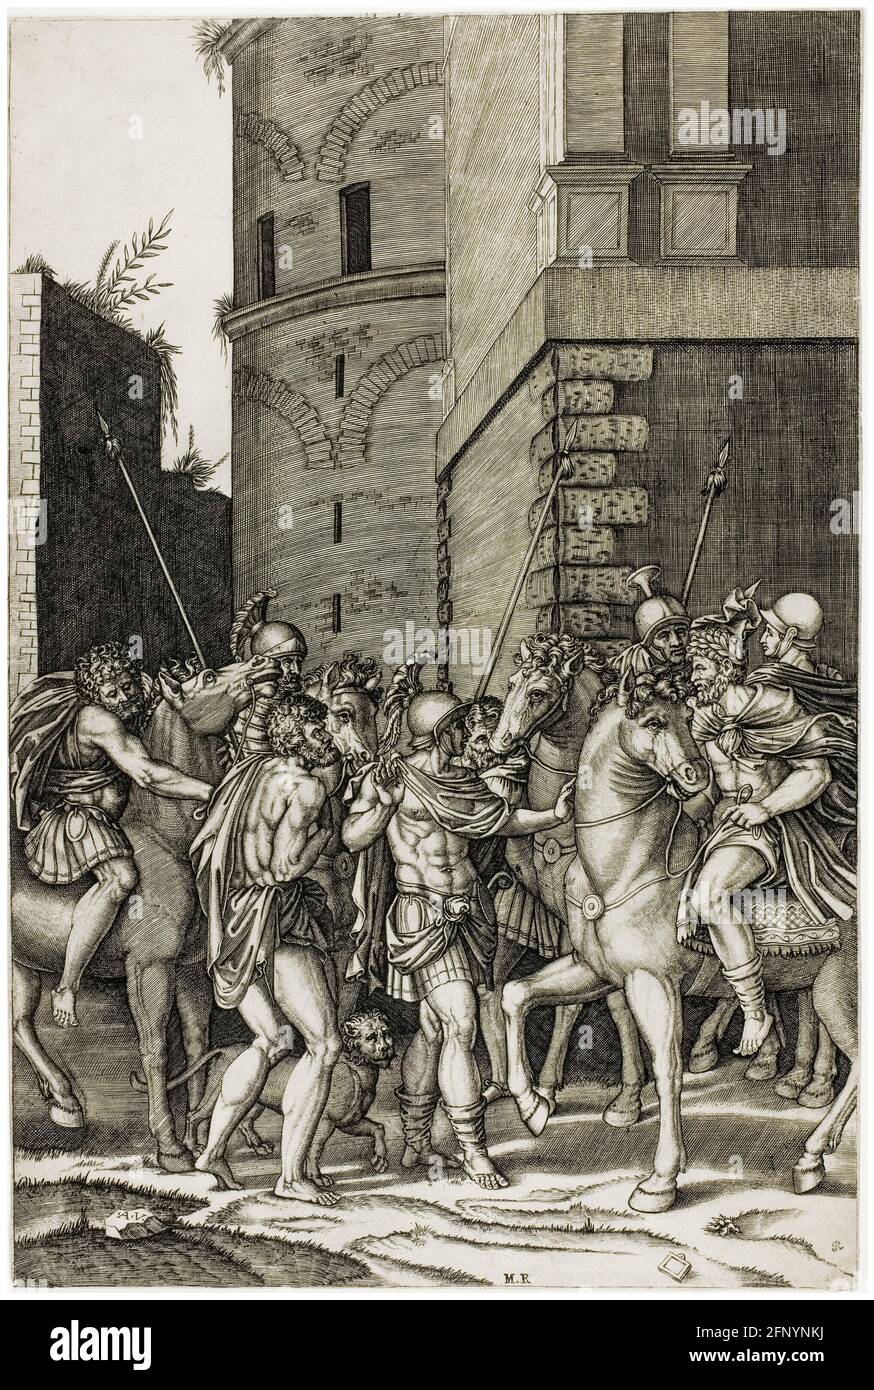 Roman Emperor (Claudius?) freeing the Slave Androcles (Androcles and the Lion), engraving by Agostino dei Musi, 1516-1517 Stock Photo